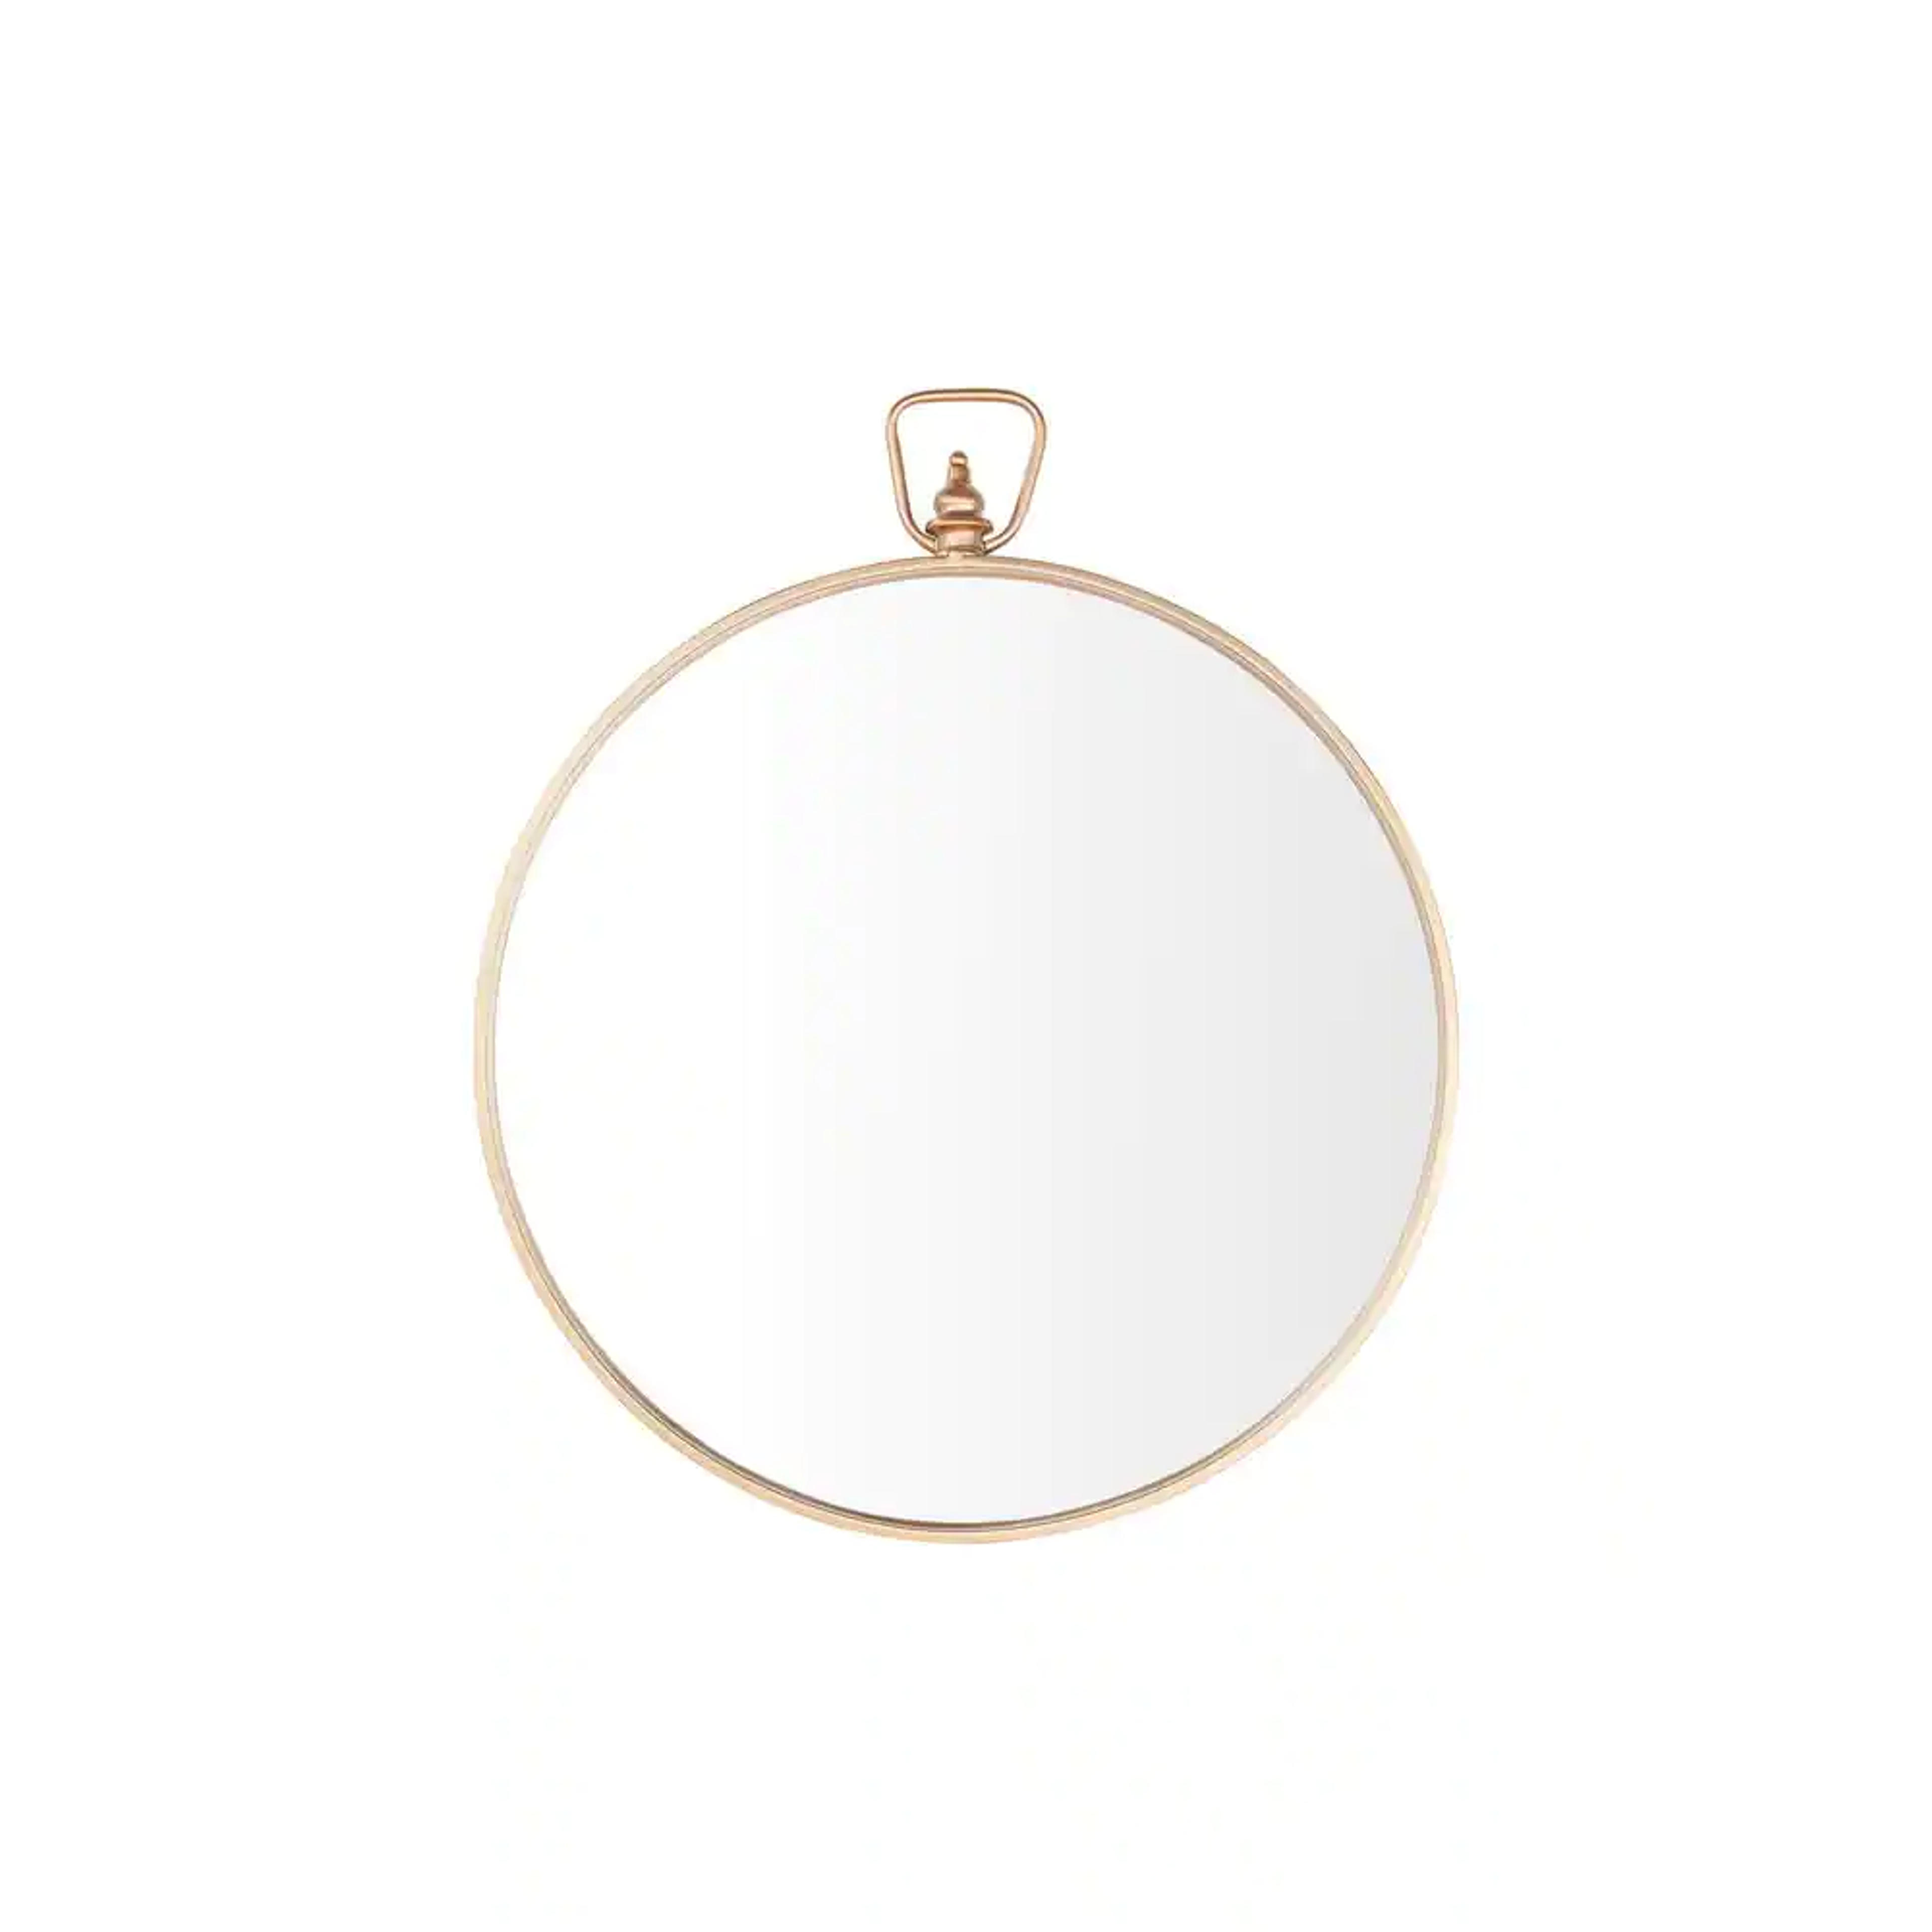 StyleWell Medium Round Gold Classic Accent Mirror with Handle (28 in. Diameter) 17MJ0173-777 - The Home Depot